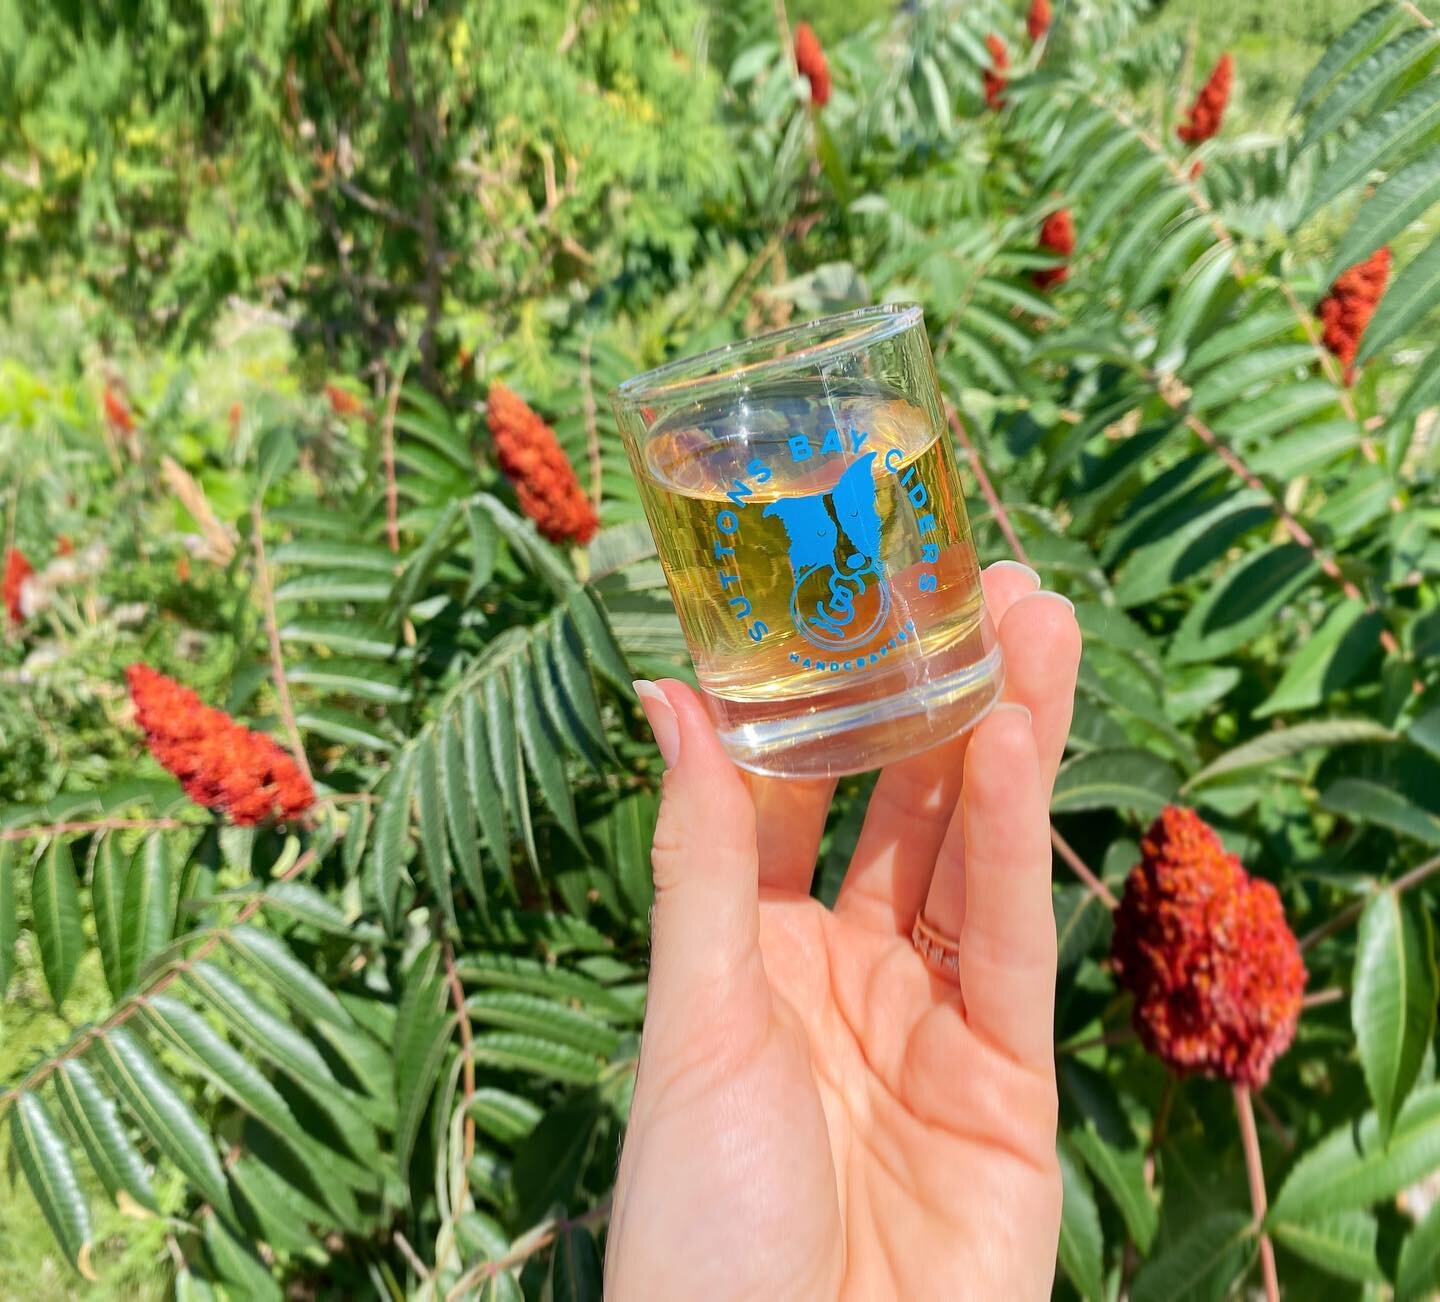 Have you tried all of our different &ldquo;Gordie Specials&rdquo;? We currently have &ldquo;Sumac&rdquo; on our rotating tap. This tart cider is made from wild sumac berries. Don&rsquo;t worry, they aren&rsquo;t the poisonous kind.